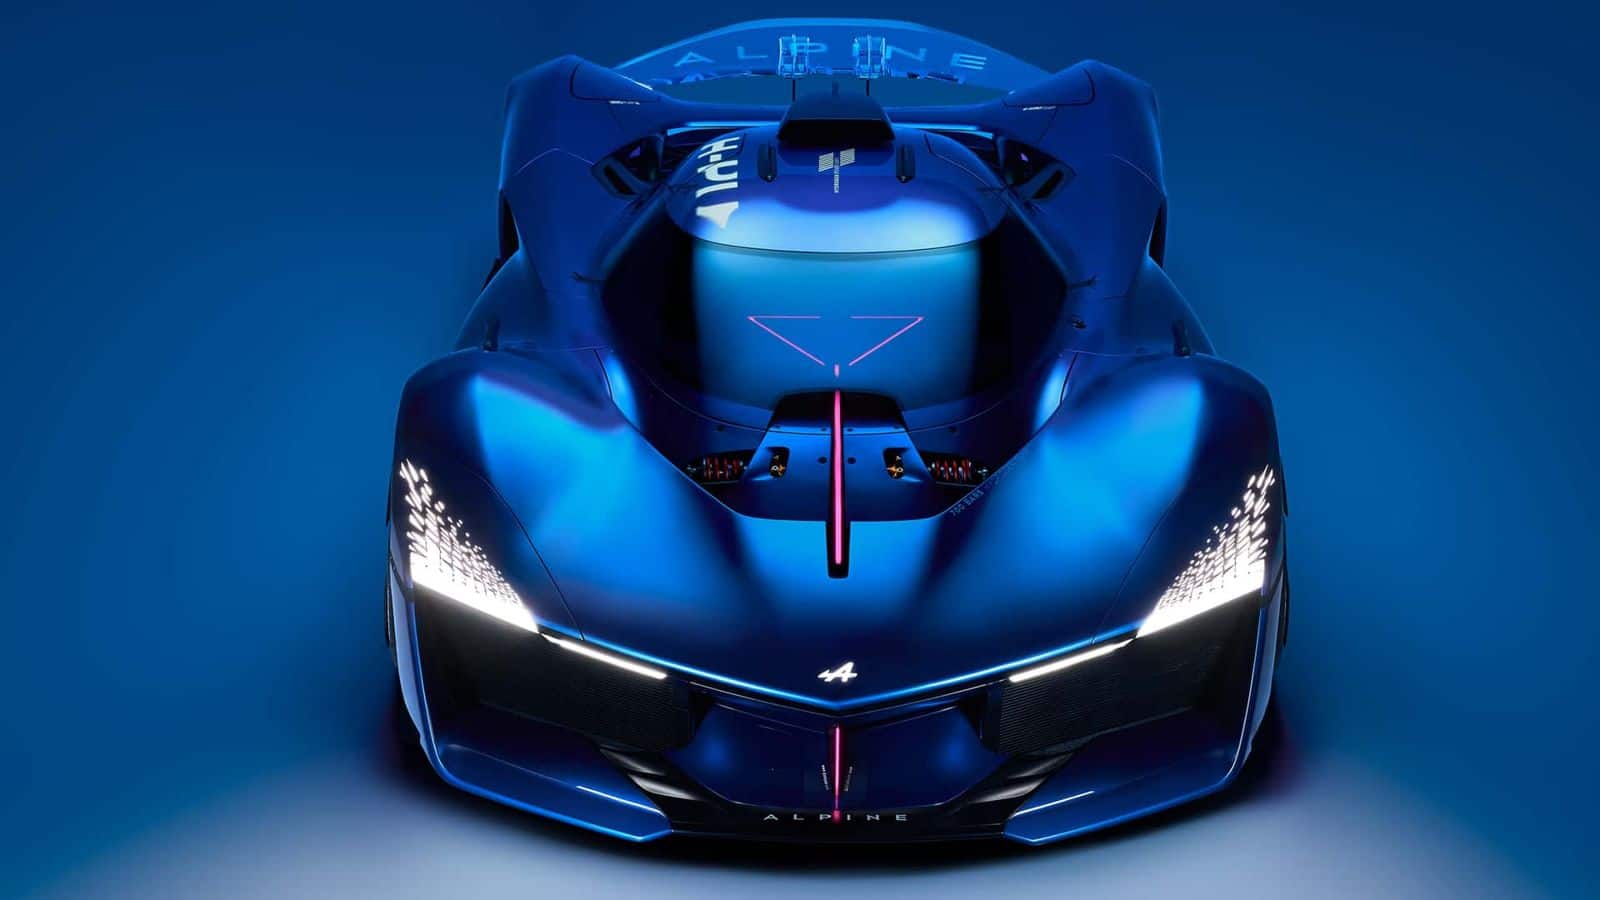 Alpine gears up to launch hydrogen V6 road car